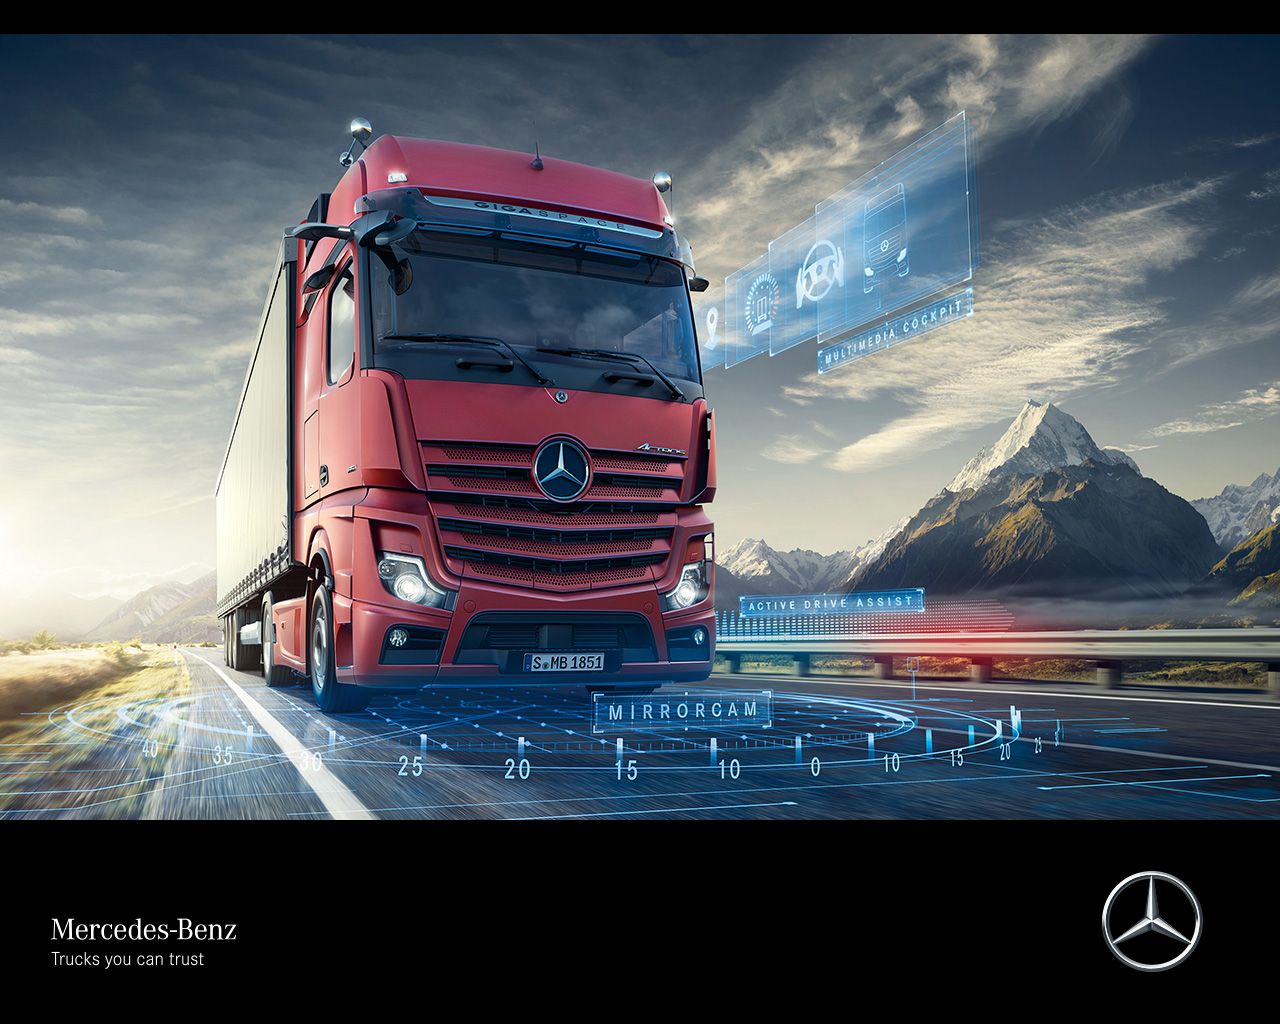 The new Actros: Multimedia